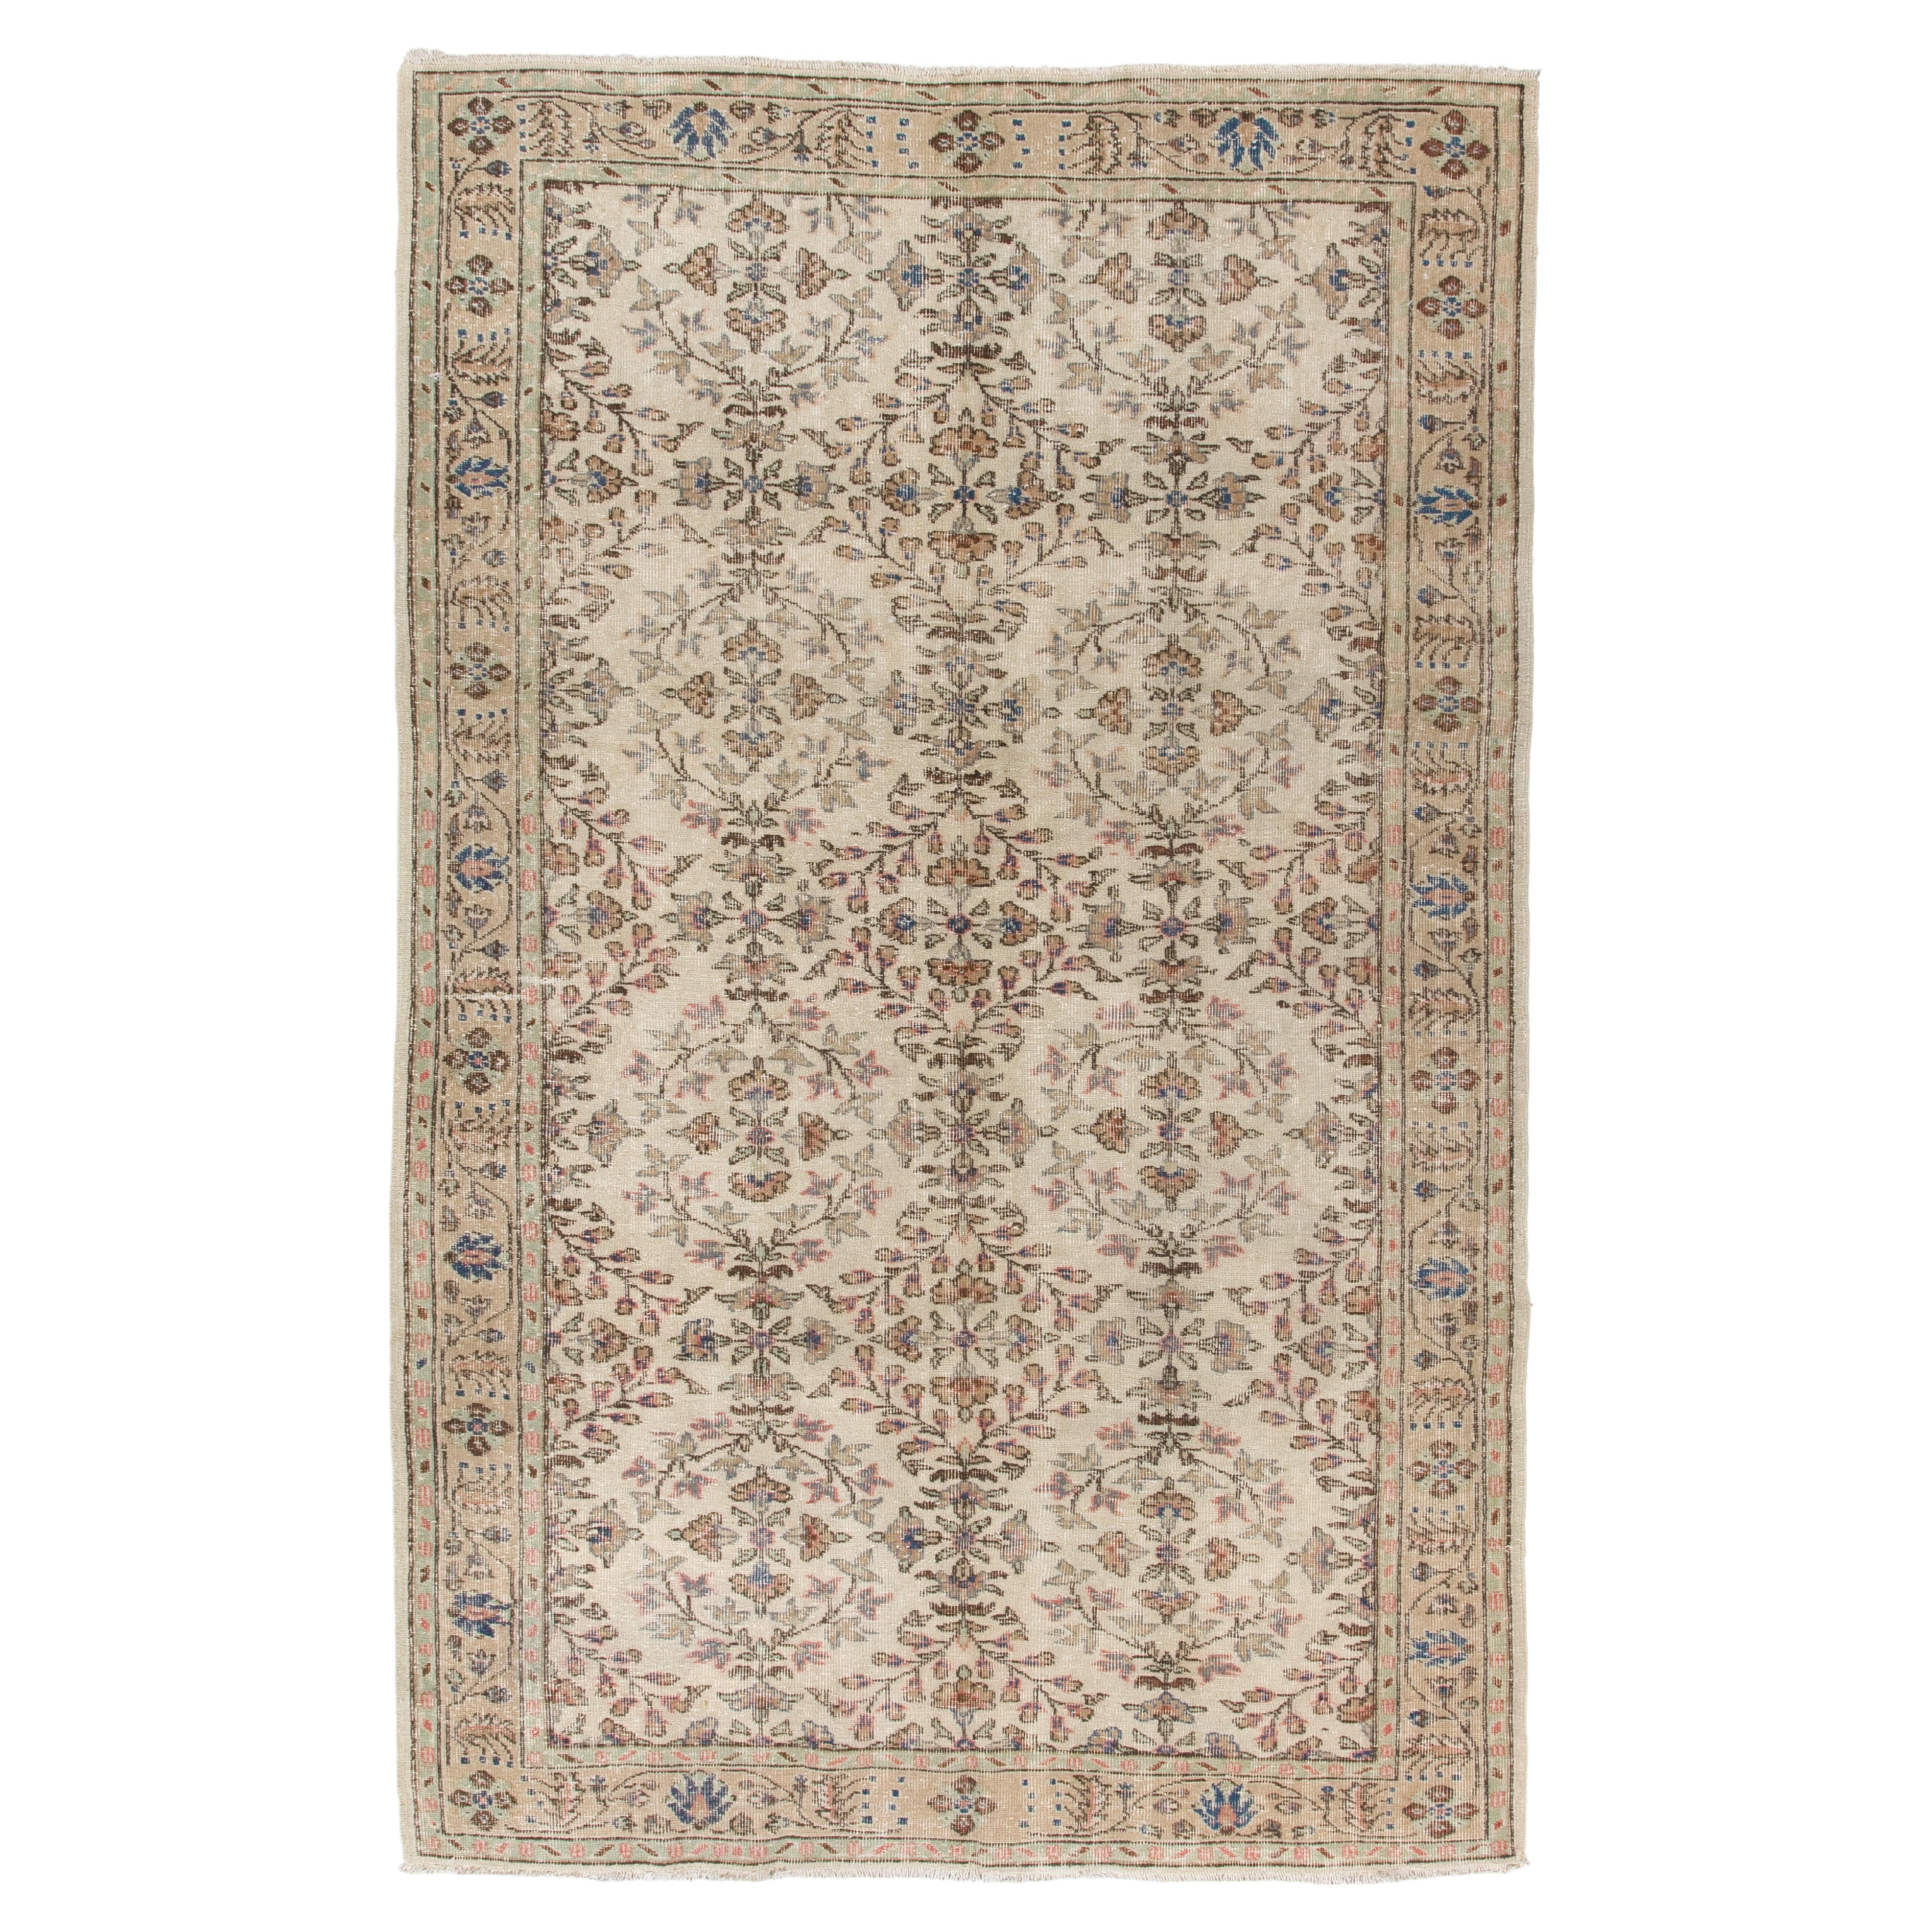 6x9 Ft Vintage Oushak Area Rug in Soft, Muted Colors, Wool Hand Knotted Carpet